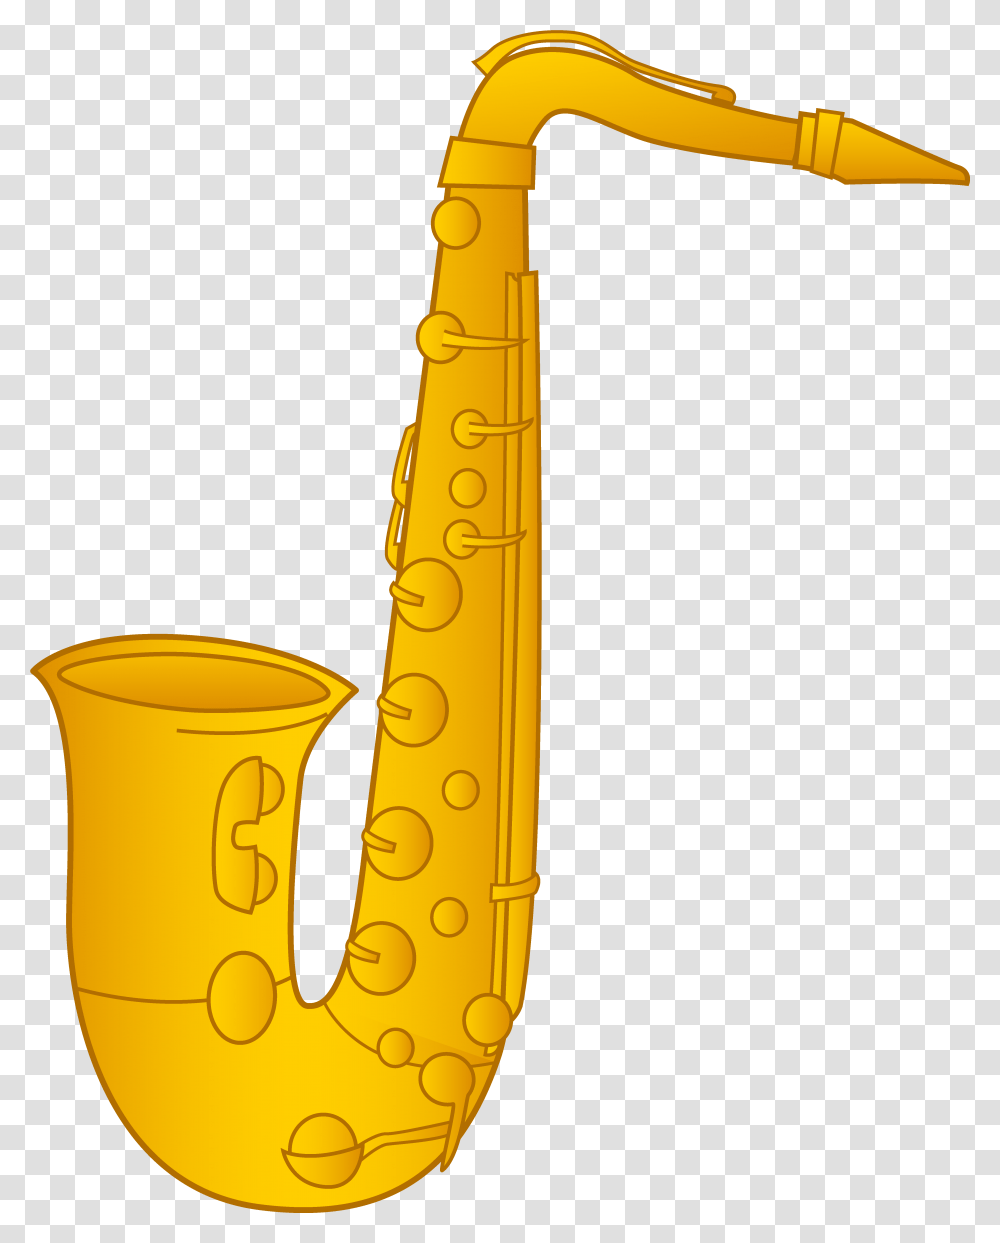 Free Saxophone Background Clip Art Saxophone, Leisure Activities, Musical Instrument, Hammer, Tool Transparent Png